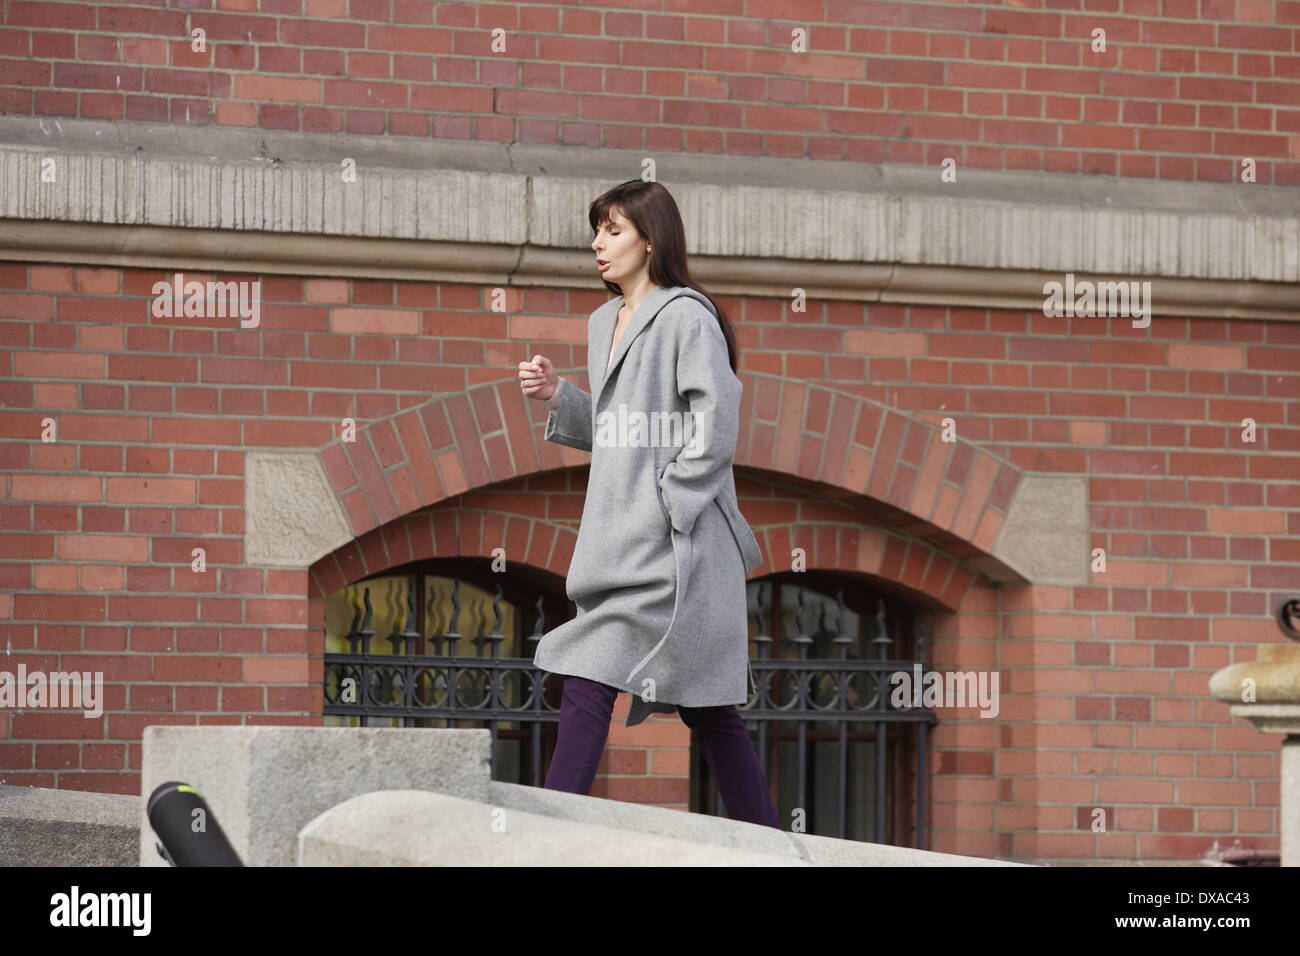 Gdansk, Poland 21st, March 2014 'Prawo Agaty' (Agata's law) tv series film set in Gdansk. Polish actress Agnieszka Dygant takes part in the scene recording. Credit:  Michal Fludra/Alamy Live News Stock Photo